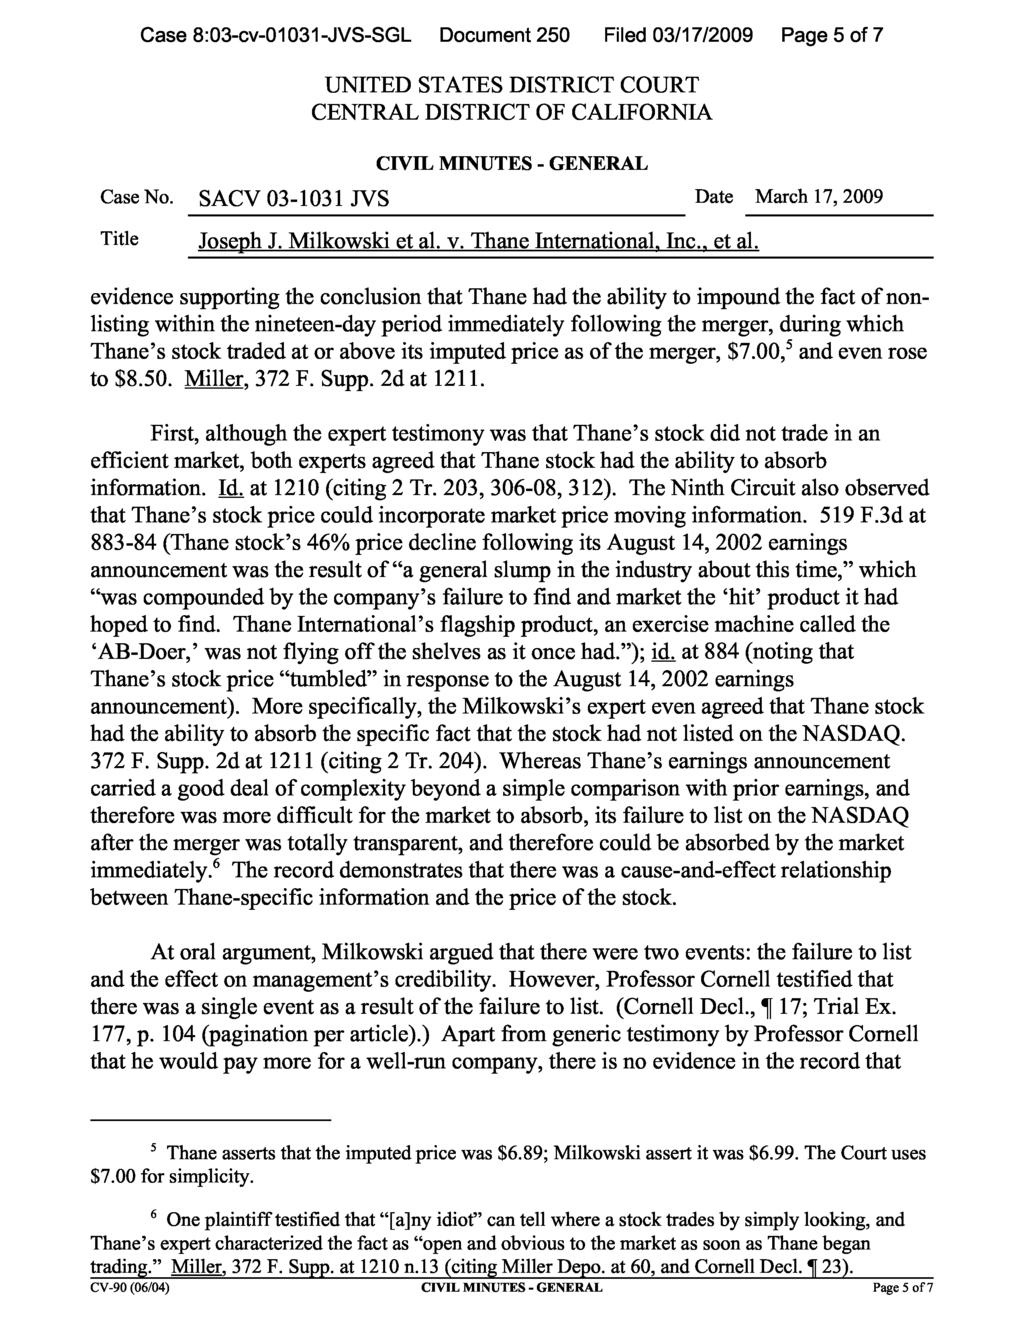 Case 8:03-cv-01031-JVS-SGL Document 250 Filed 03/17/2009 Page 5 of 7 evidence supporting the conclusion that Thane had the ability to impound the fact of nonlisting within the nineteen-day period